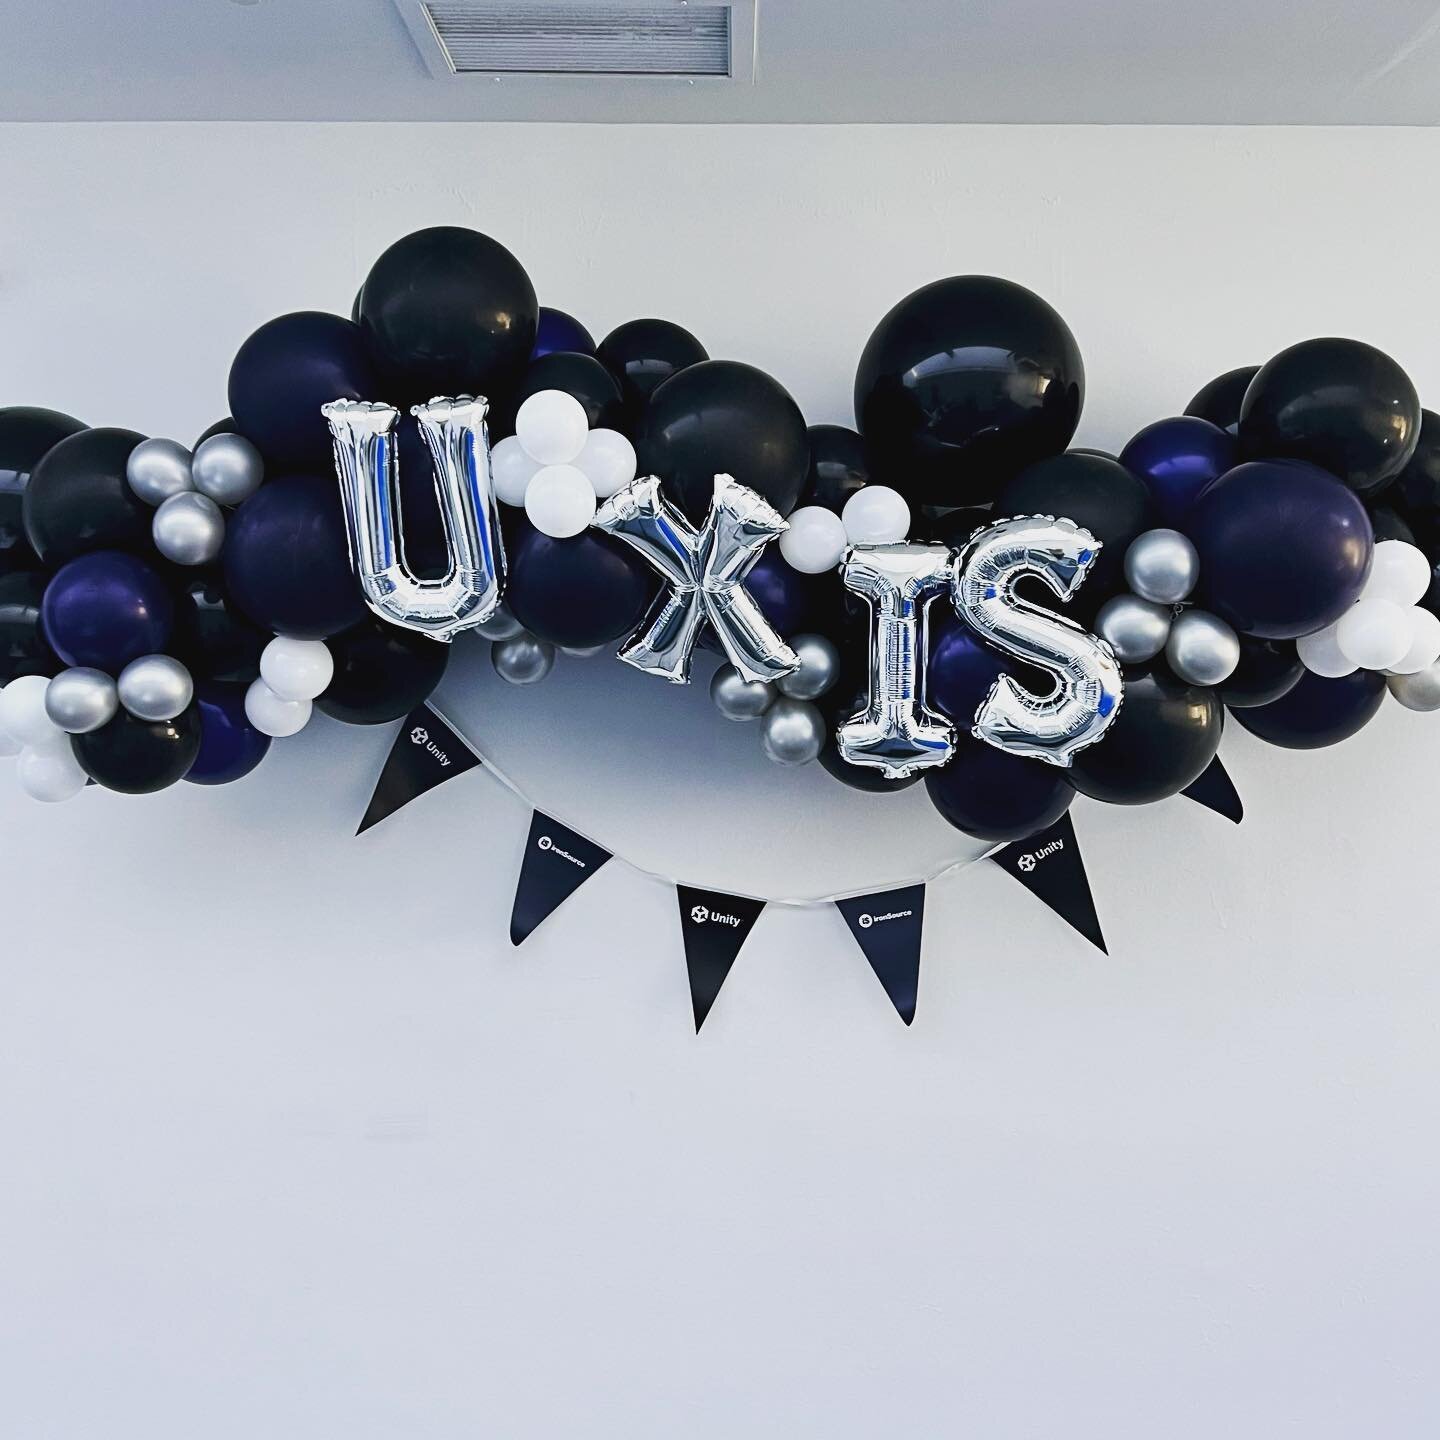 Celebrating a merger between Unity and Iron Source here in Somerville! &thinsp;
We can help your business celebrate important milestones, new product launches, grand openings, brand activation for in office or venue celebrations. &thinsp;&thinsp;
Bra